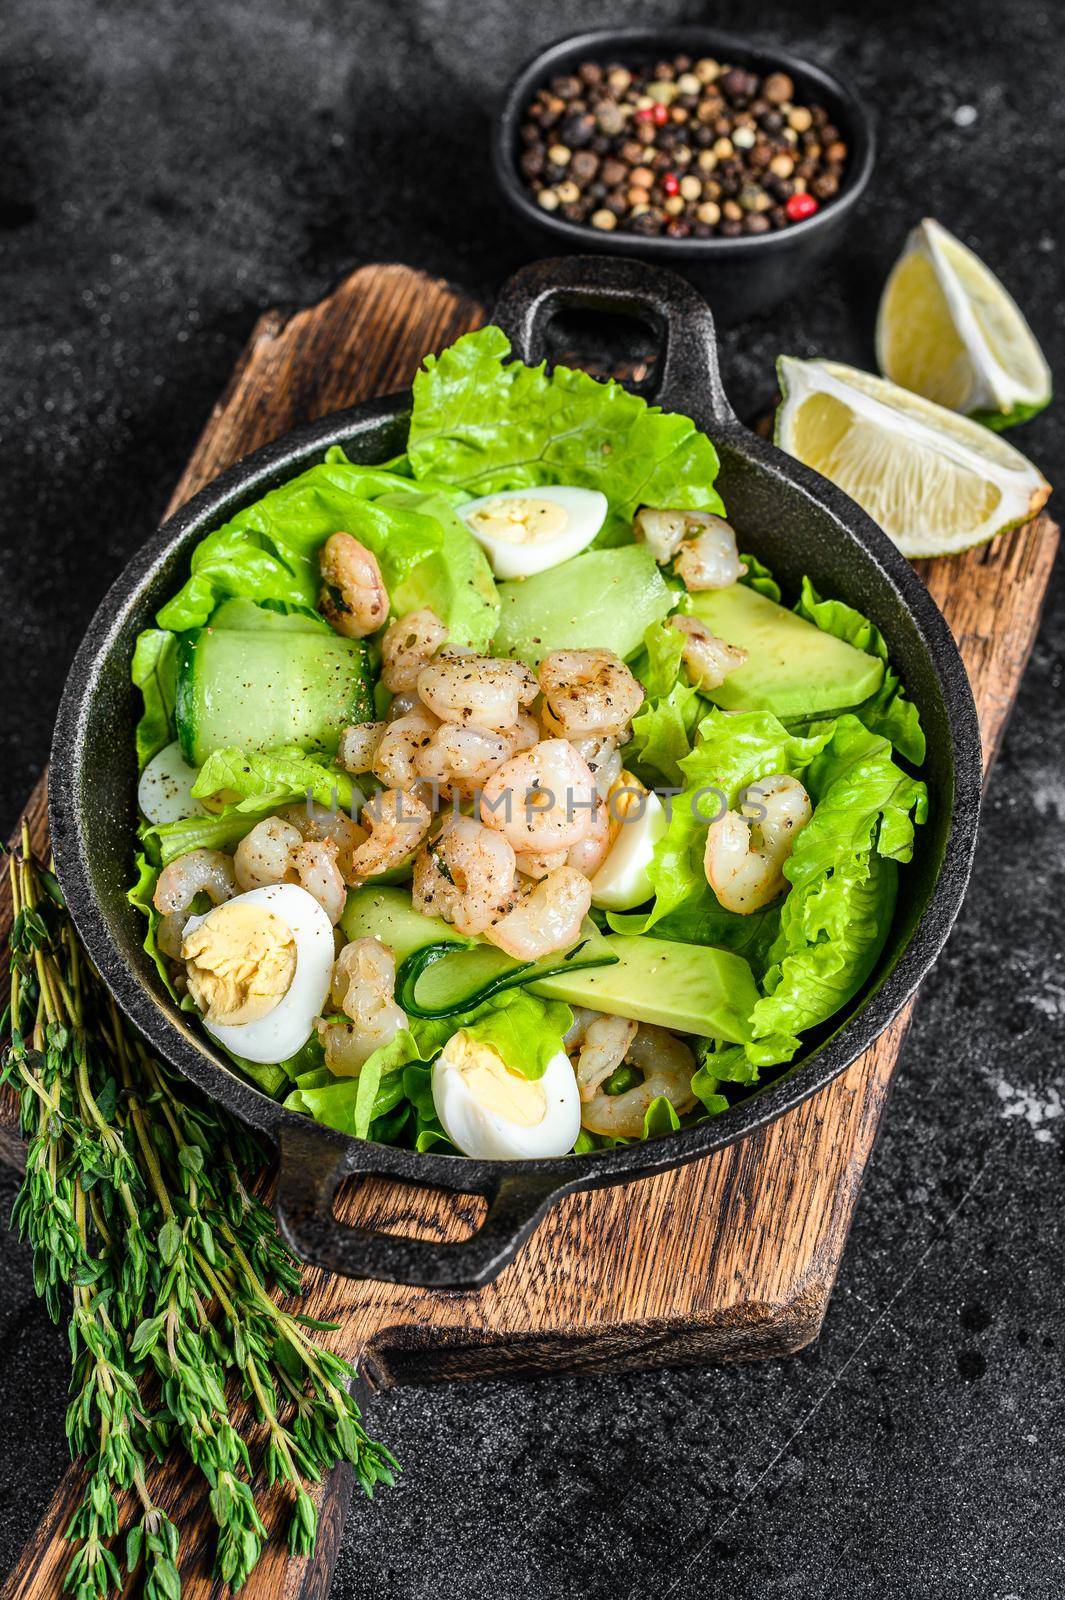 Seafood salad with grilled shrimps prawns, egg, avocado and cucumber in a pan. Dark wooden background. top view.